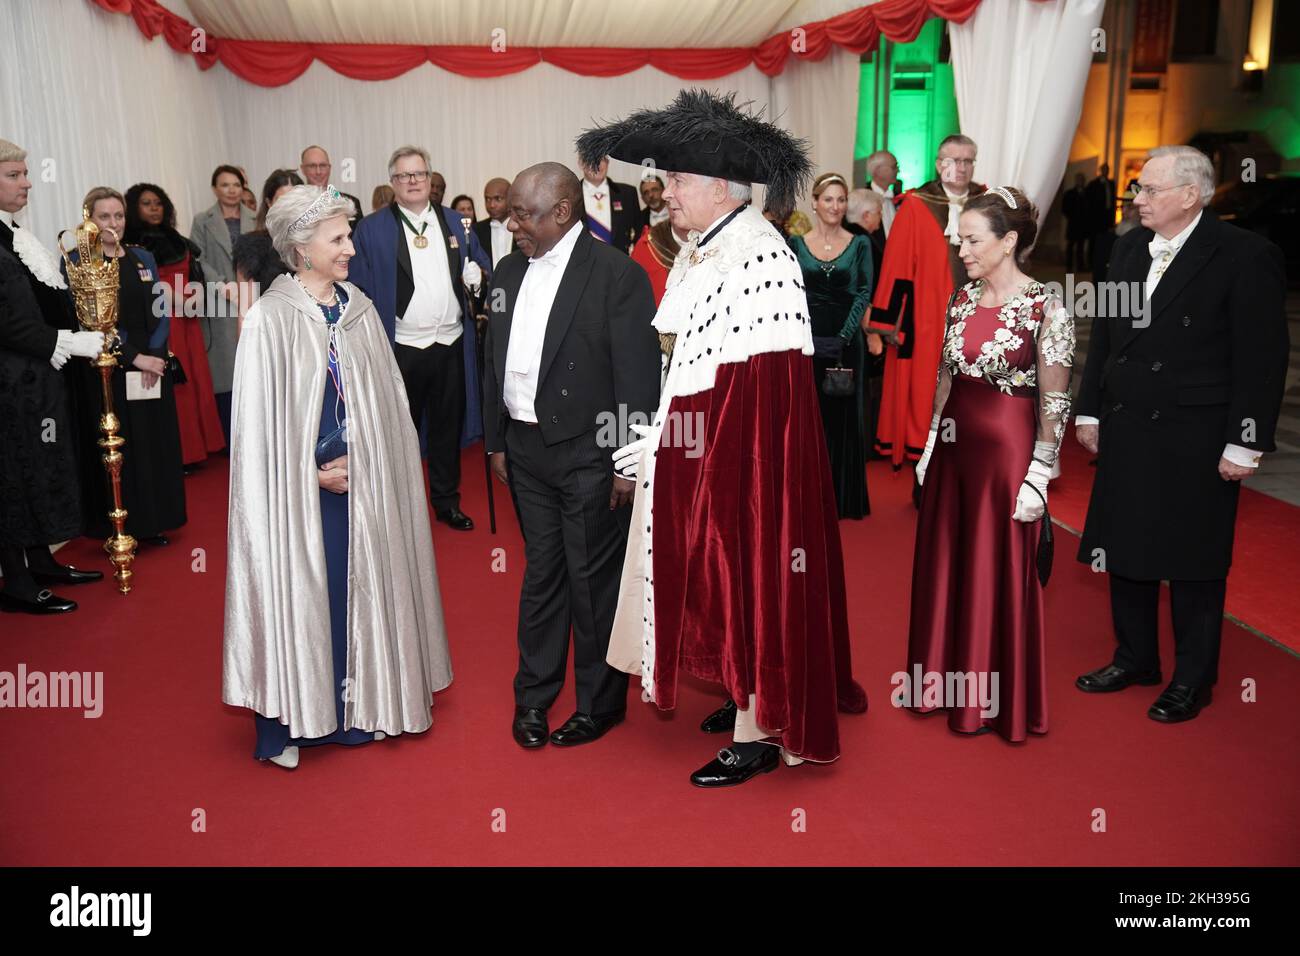 President Cyril Ramaphosa of South Africa, with the Duchess of Gloucester (left) the Lord Mayor of London, Nicholas Lyons, the Lady Mayoress of London, Felicity Lyons and the Duke of Gloucester, attend a banquet at the Guildhall in London, given by the Lord Mayor and City of London Corporation, during his state visit to the UK. Picture date: Wednesday November 23, 2022. Stock Photo